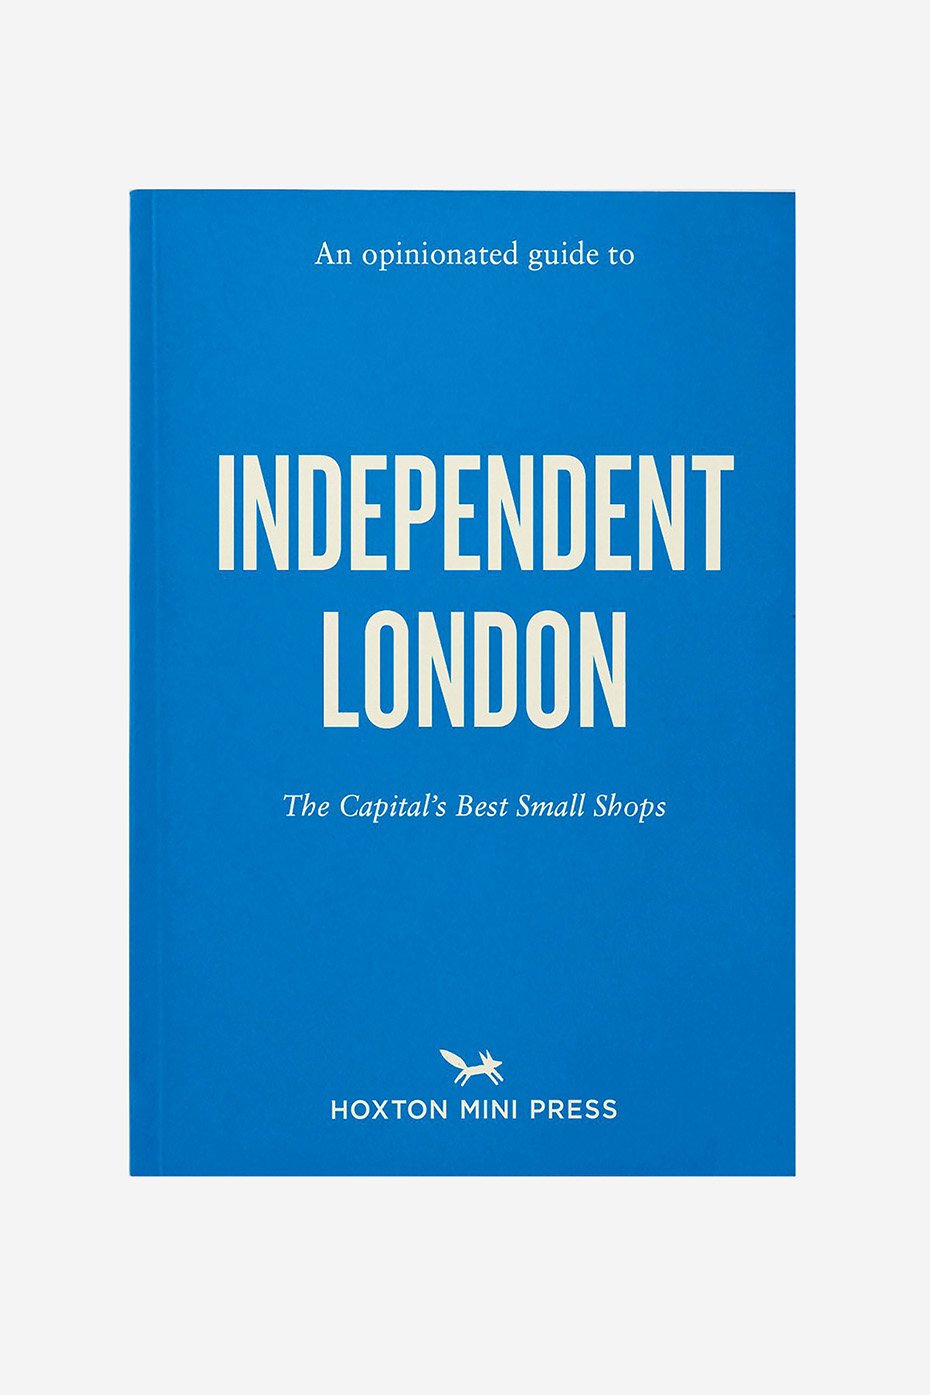 Turnaround Books An Opinionated Guide To Independent London Book By Hoxton Mini Press